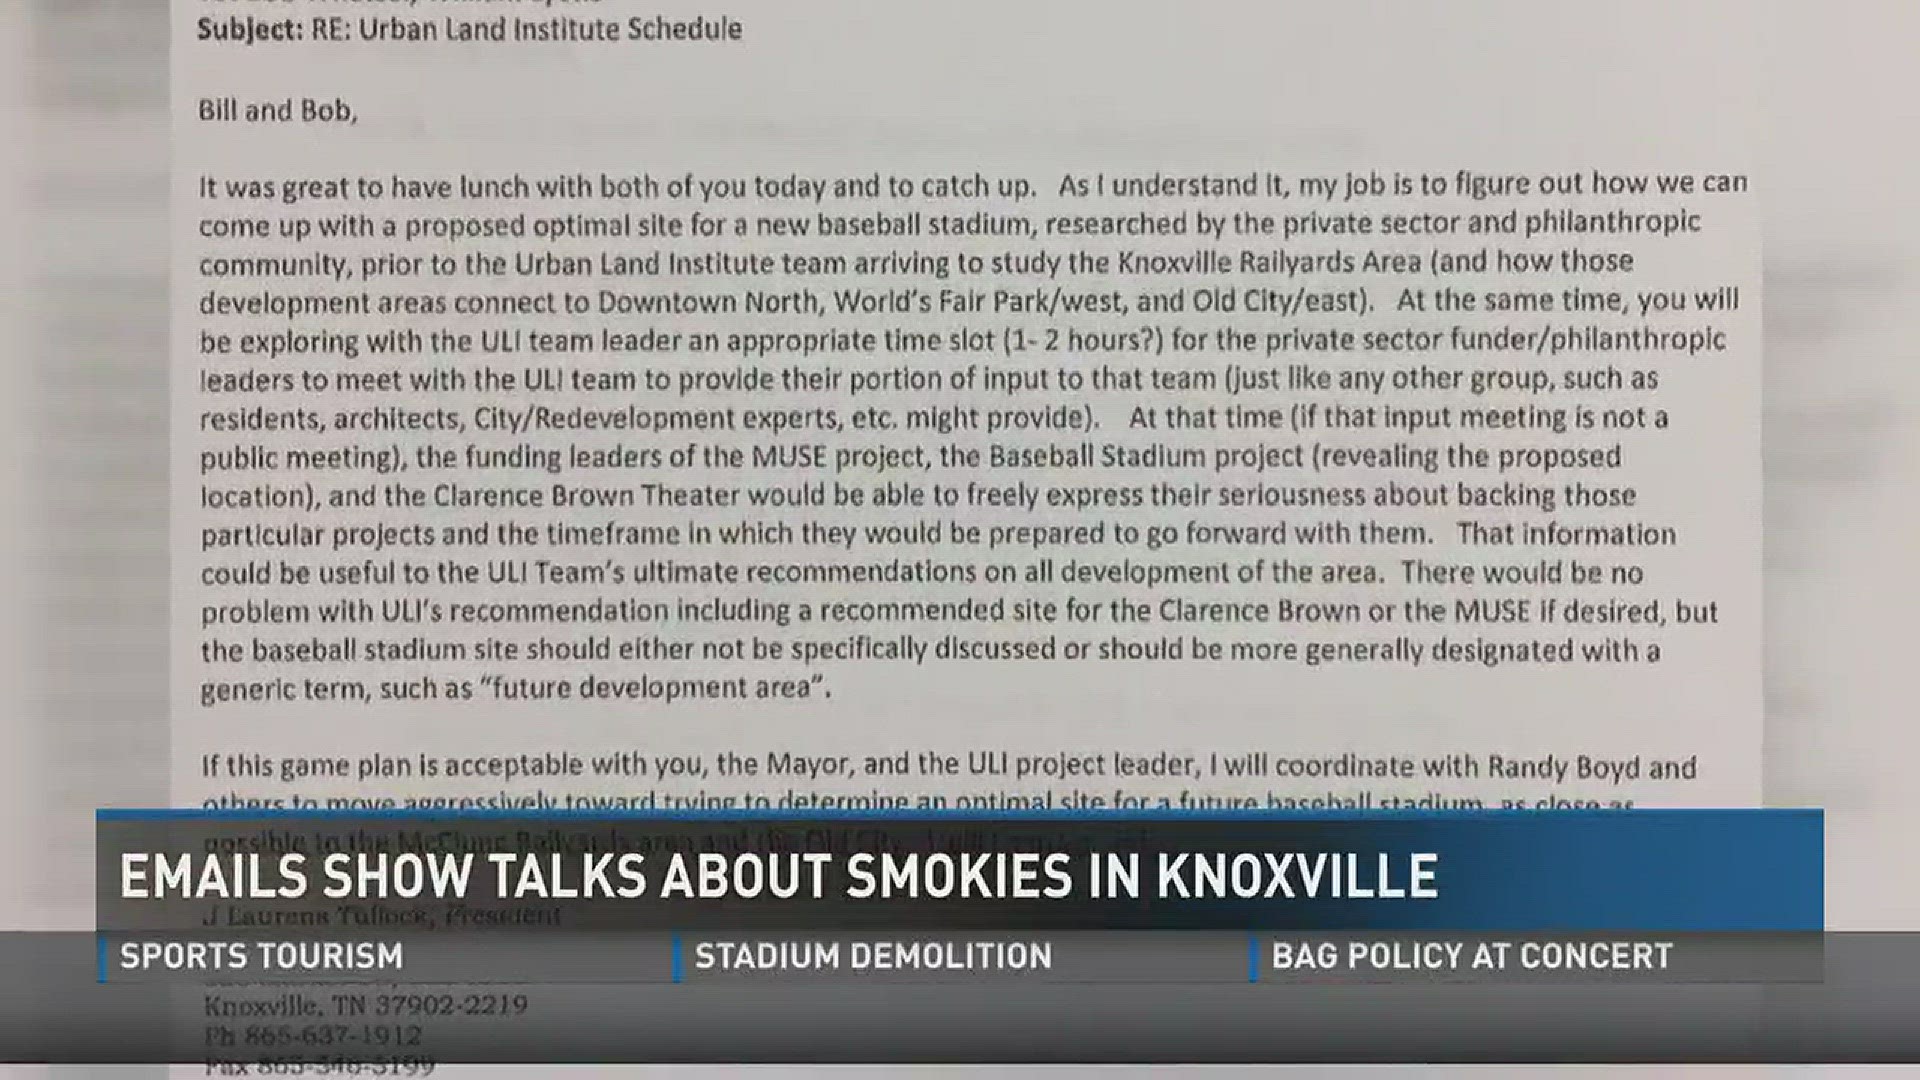 Sept. 14, 2016: Emails show Tennessee Smokies owner Randy Boyd talked to Knoxville leaders multiple times over the past few years about moving the baseball team back to Knoxville from Sevier County.